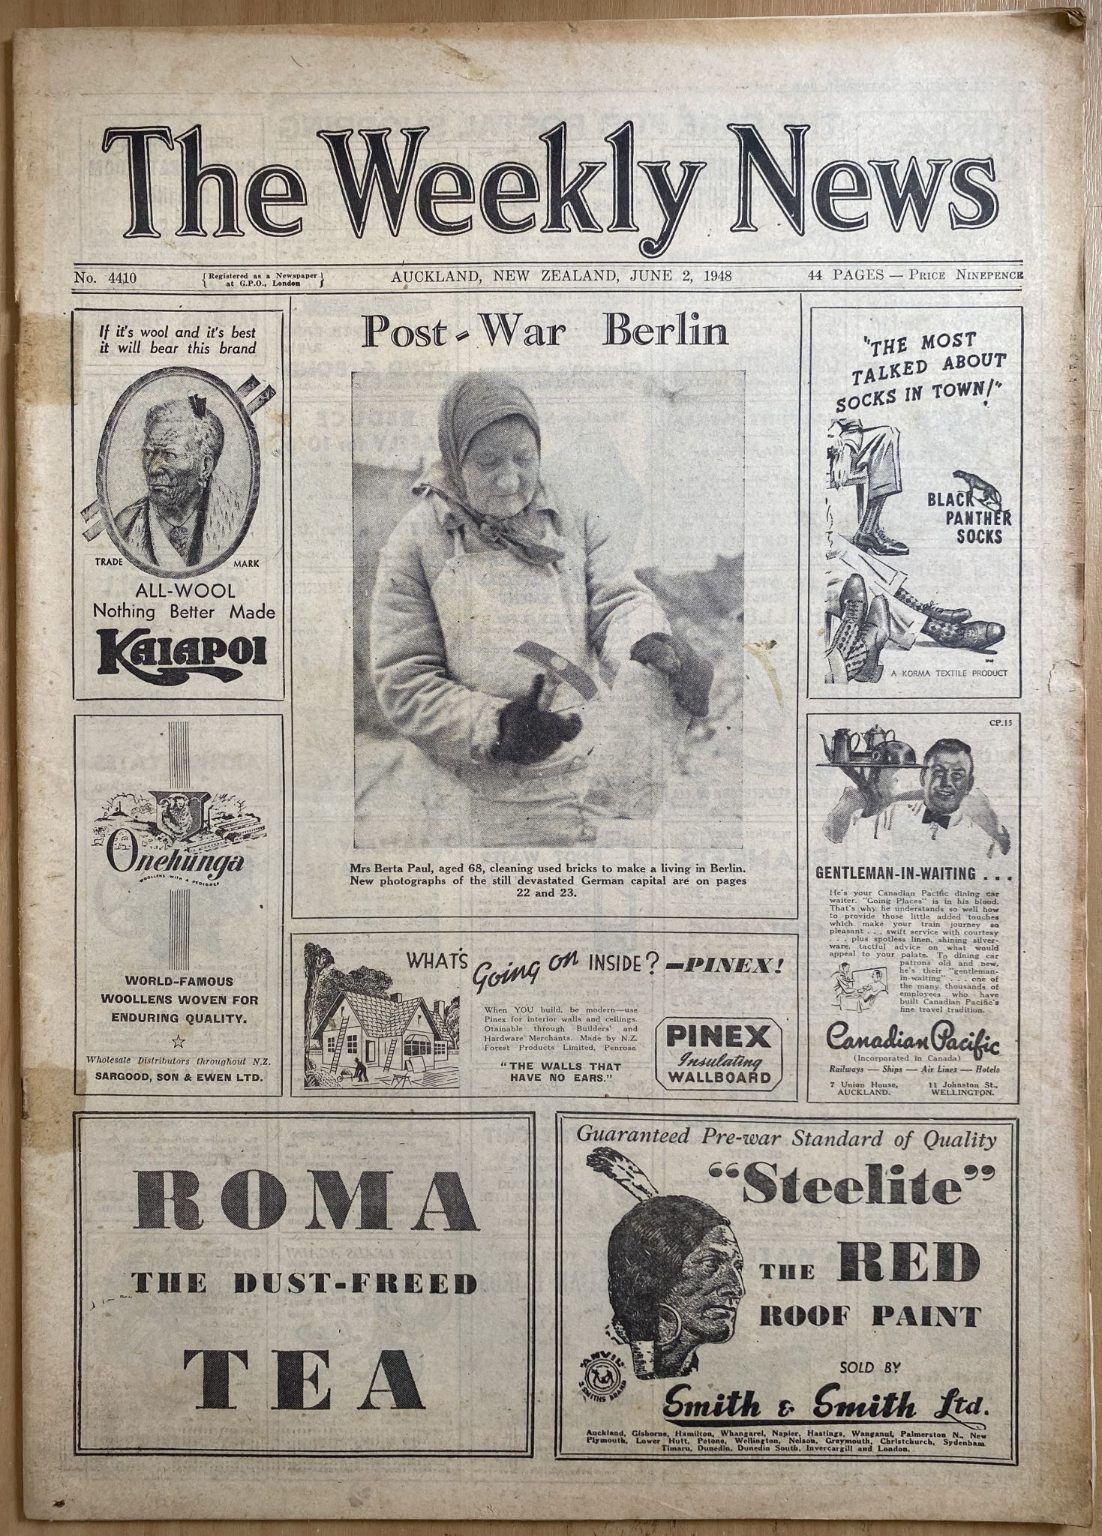 OLD NEWSPAPER: The Weekly News - No. 4410, 2 June 1948